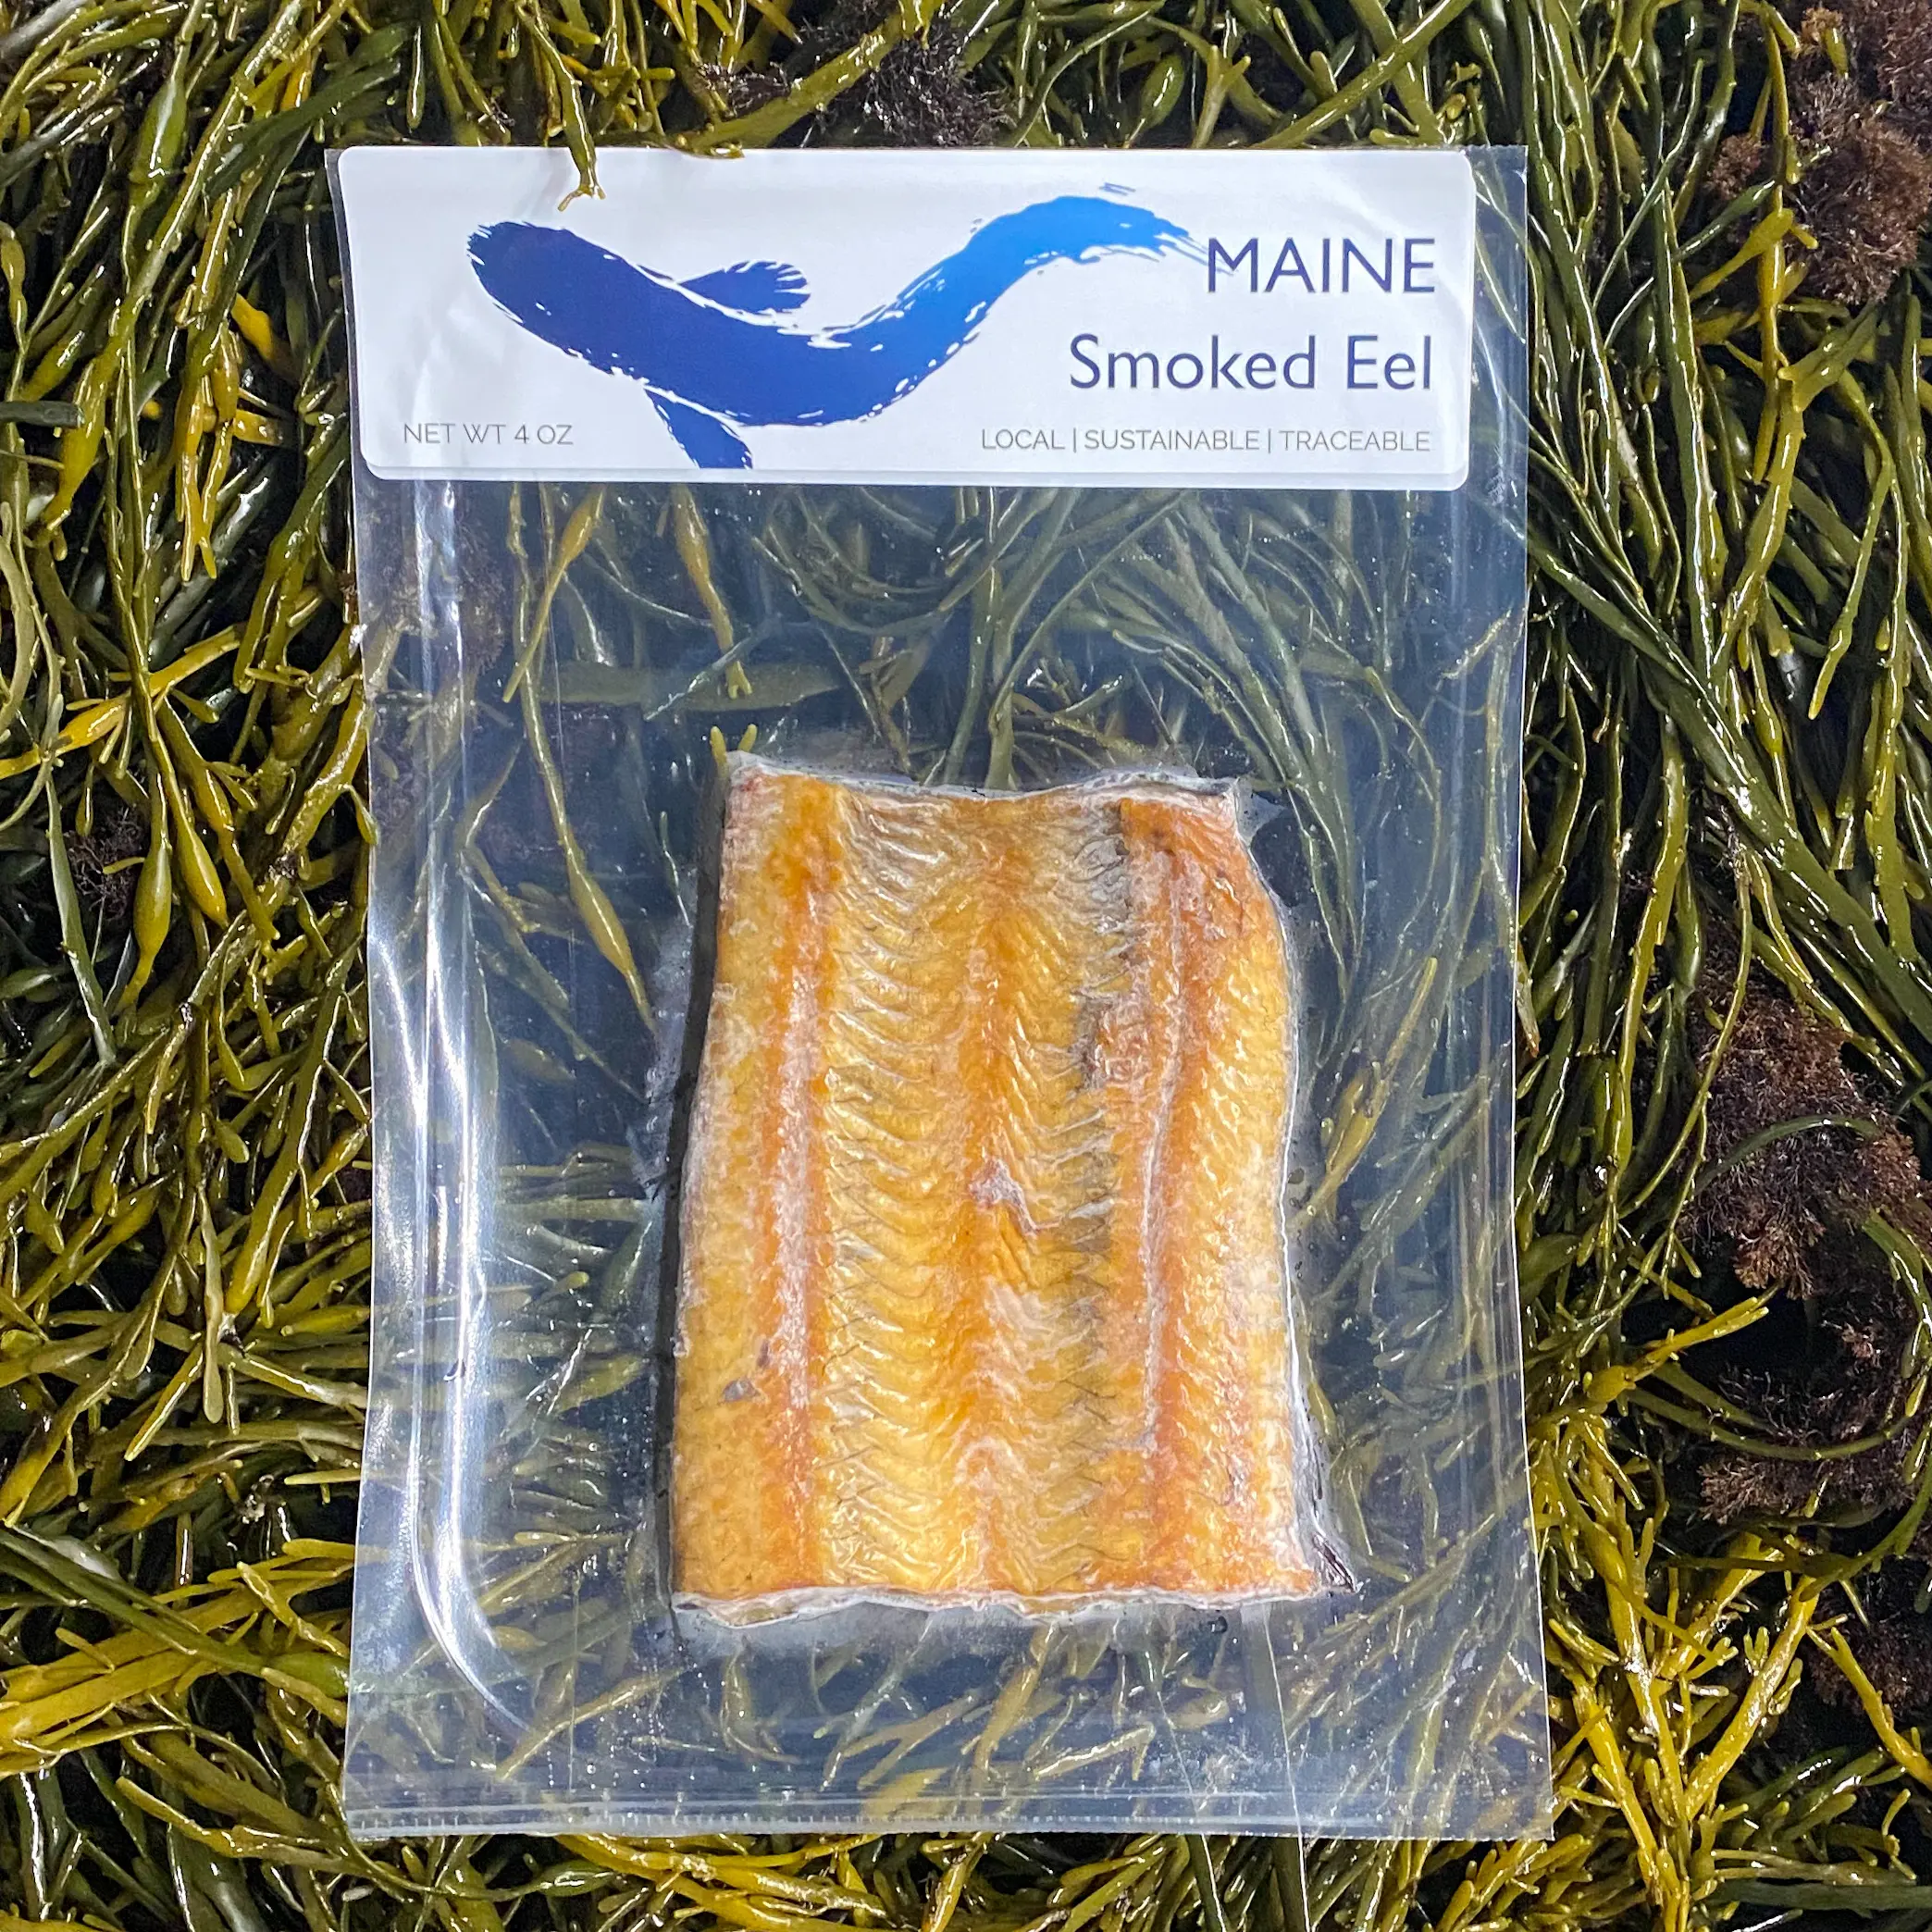 smoked eel price - What is the price of baby eel in India